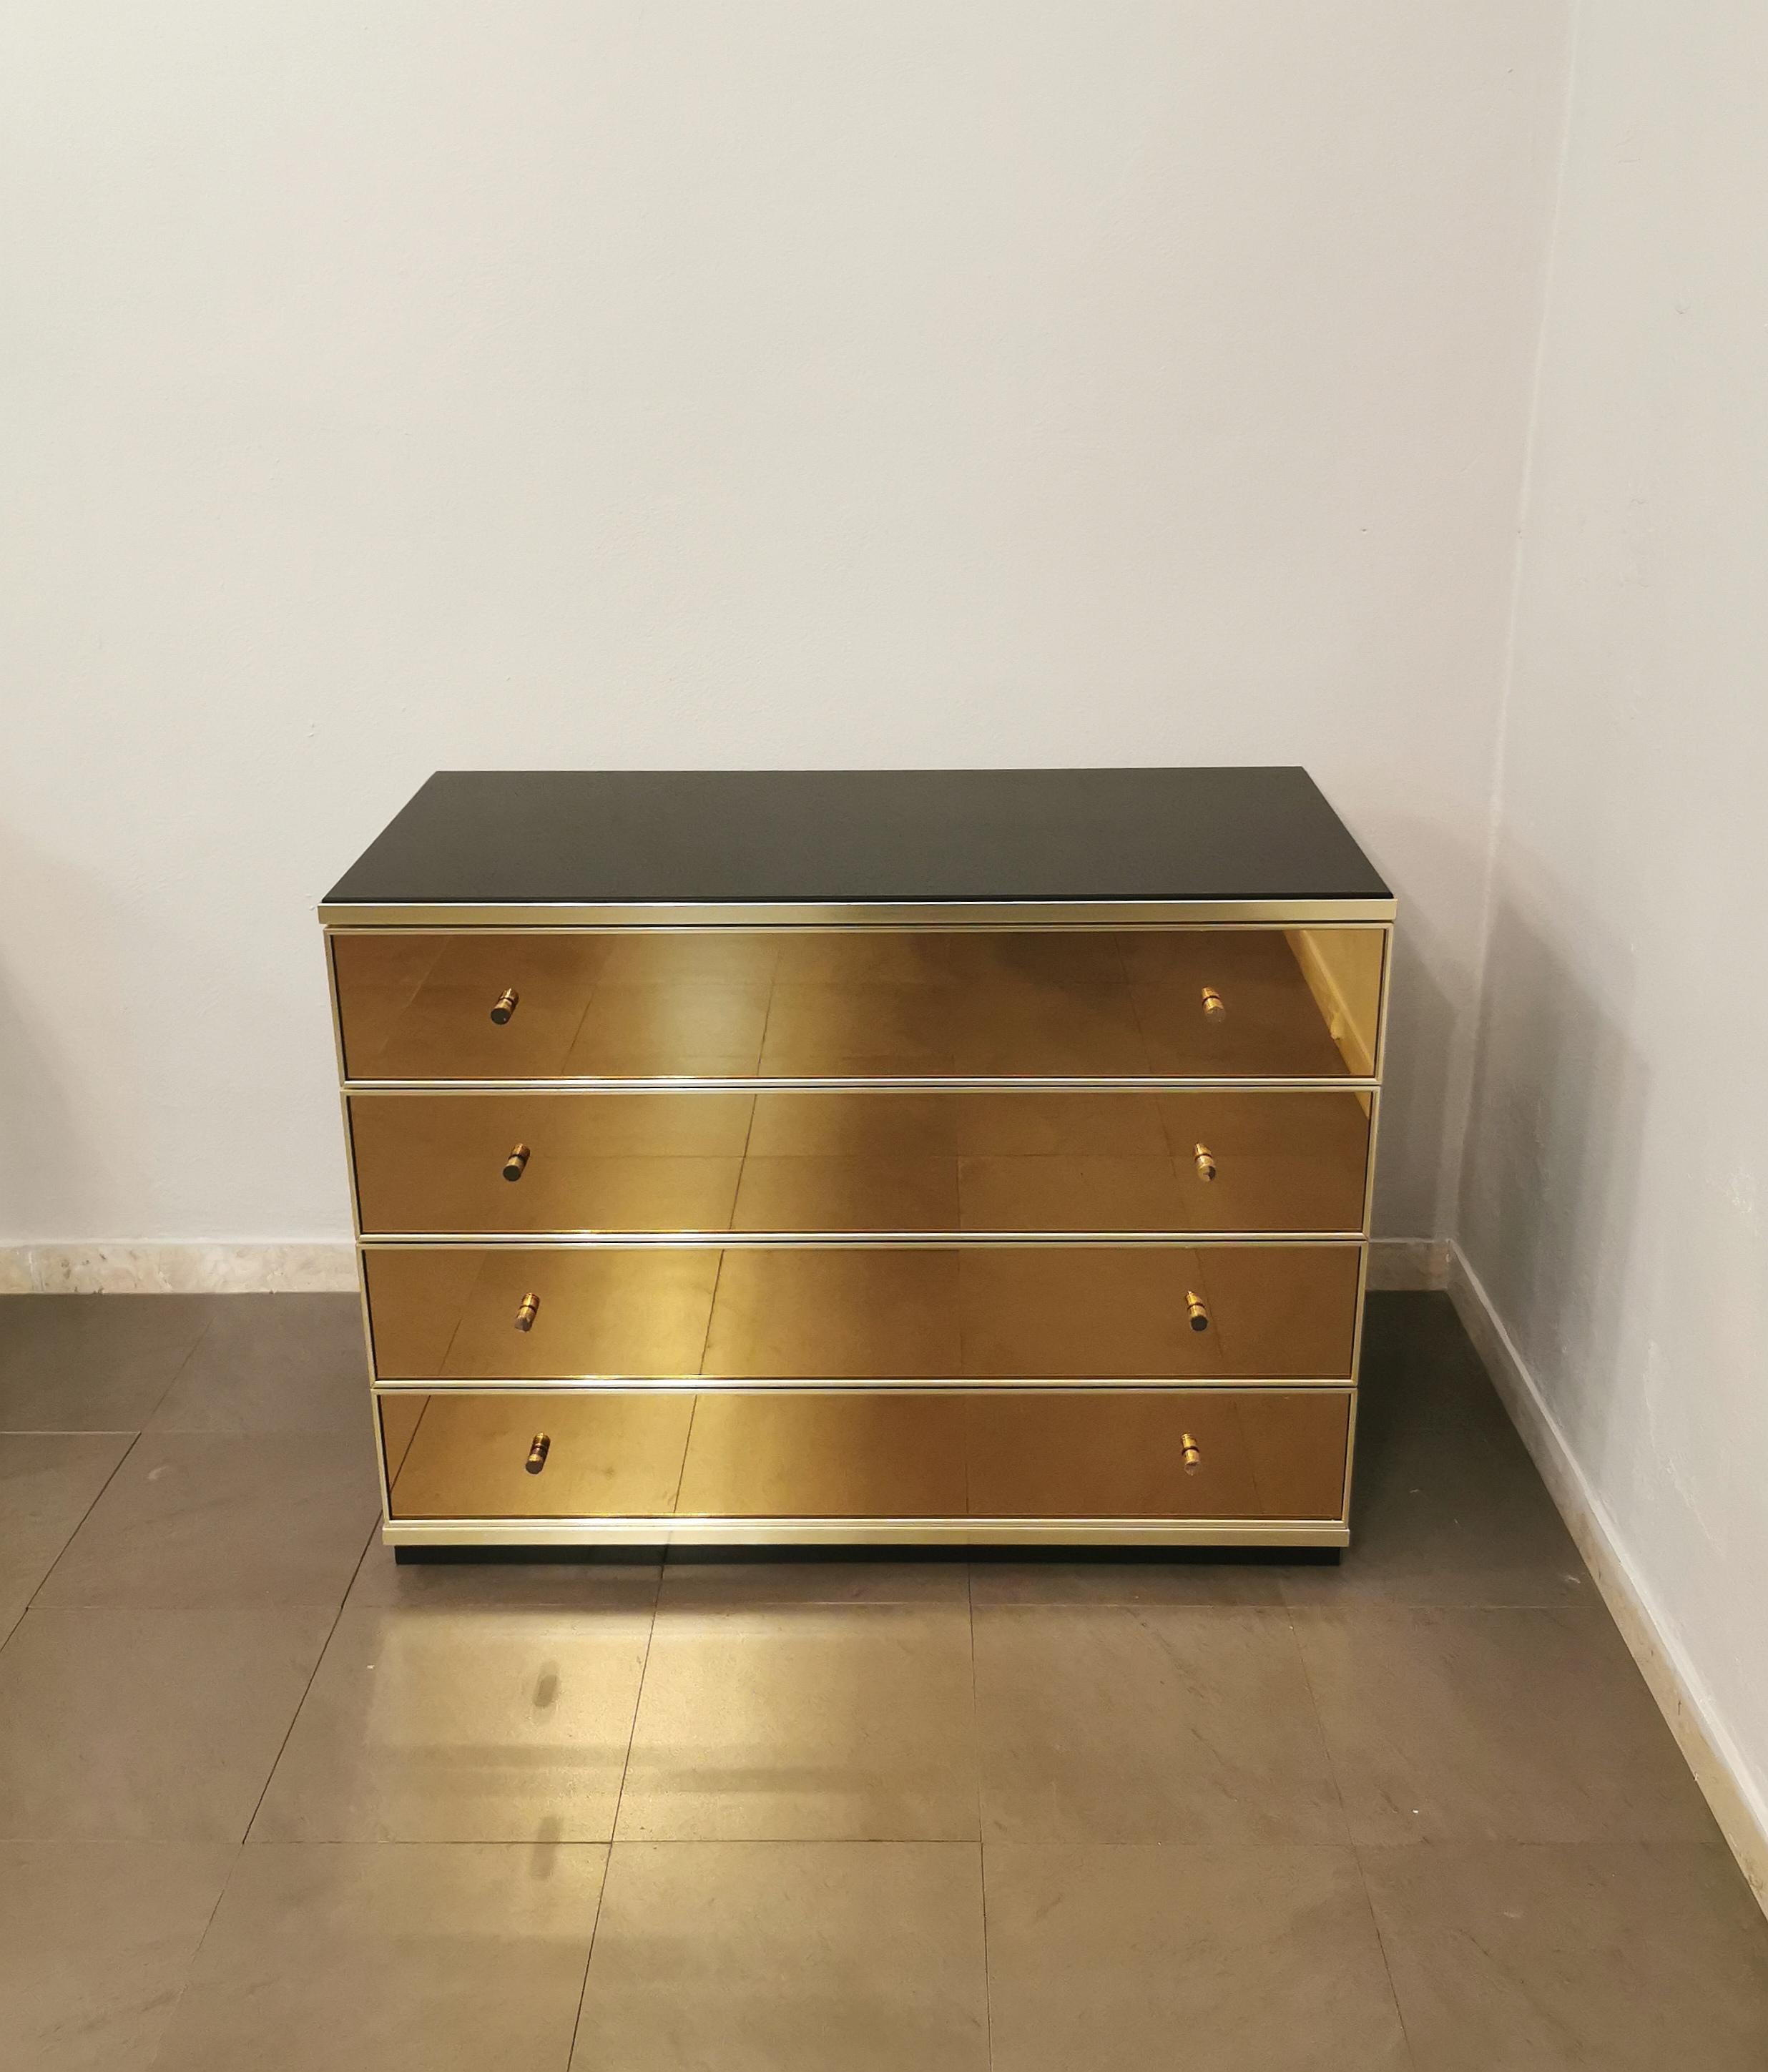 Elegant chest of drawers designed by the Italian designer Renato Zevi in the 70s. The chest of drawers has a black lacquered wooden structure, a dark glass top and 4 bronzed mirrored glass drawers with sand-colored suede inside. Finishes in gilded